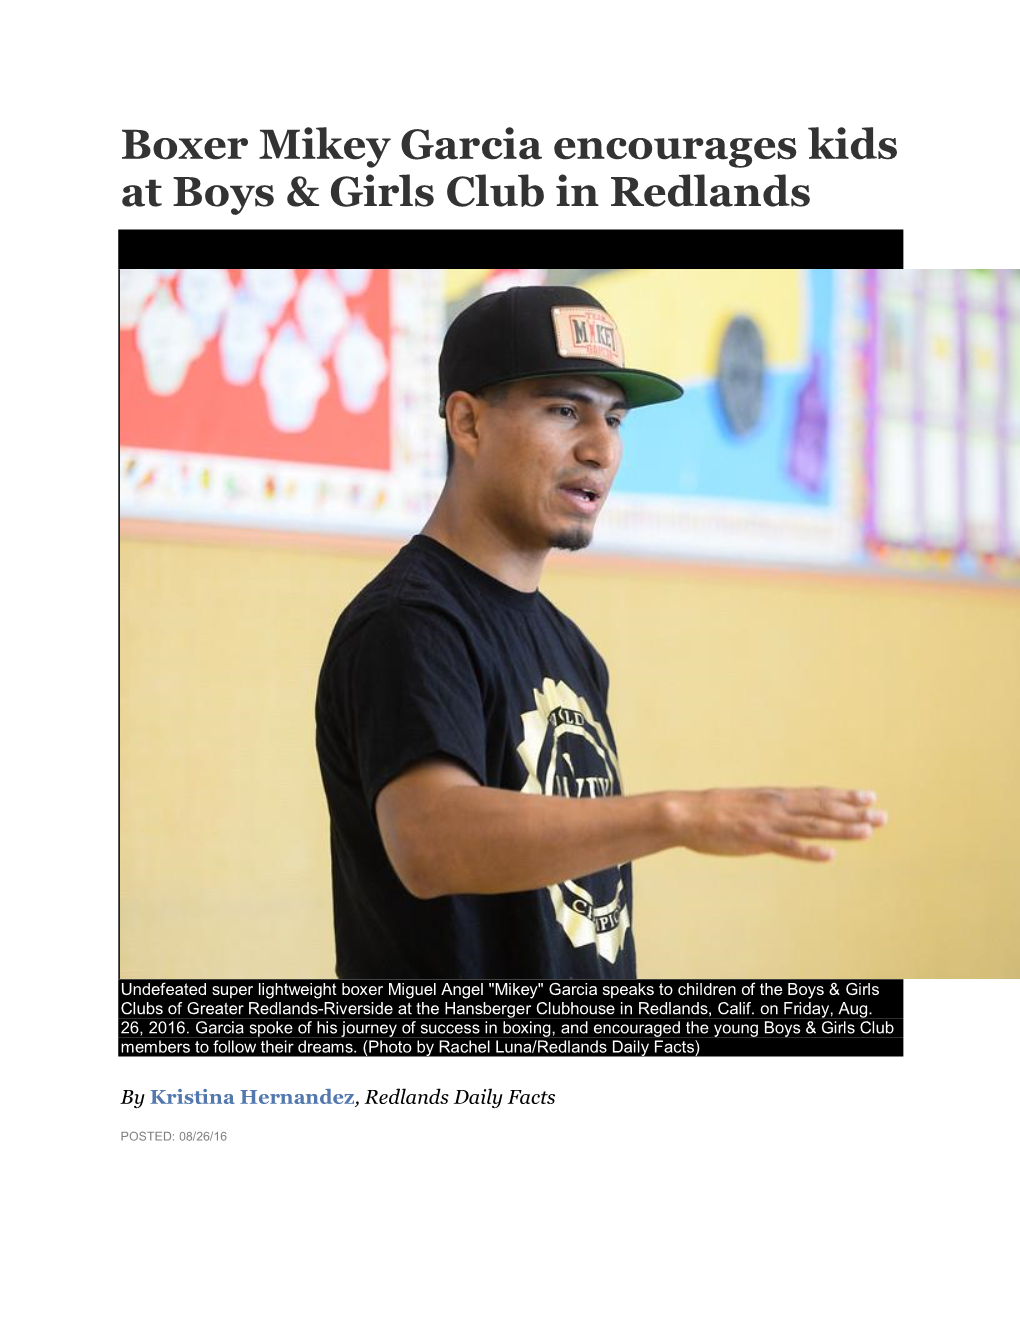 Boxer Mikey Garcia Encourages Kids at Boys & Girls Club in Redlands